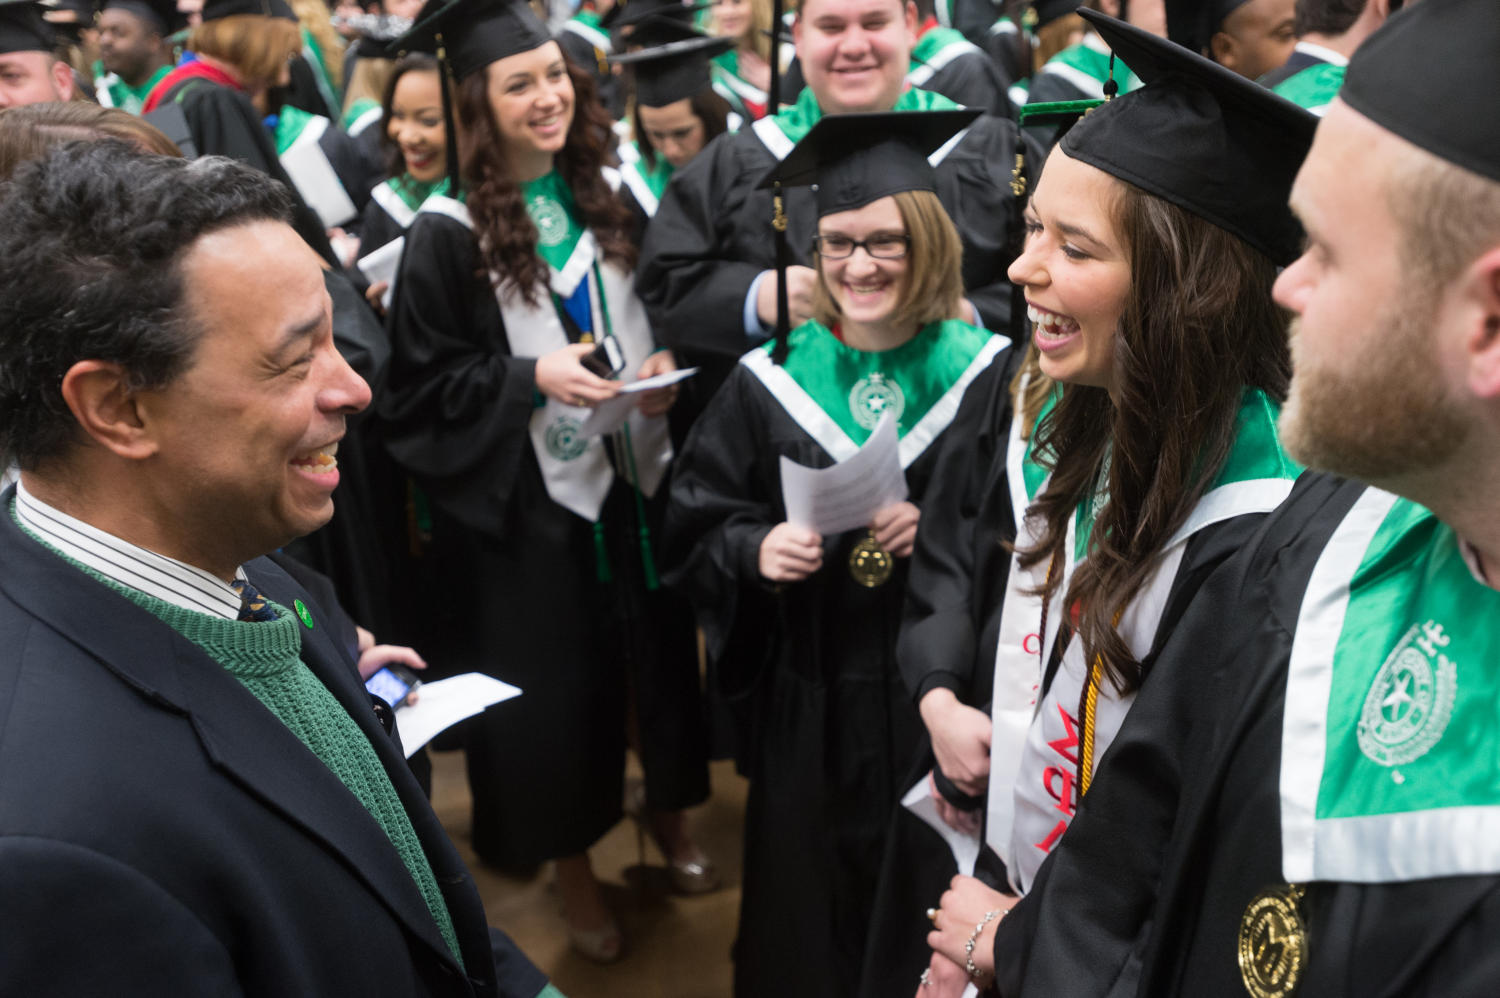 [Neil Foote with students at UNT Commencement]
                                                
                                                    [Sequence #]: 1 of 1
                                                